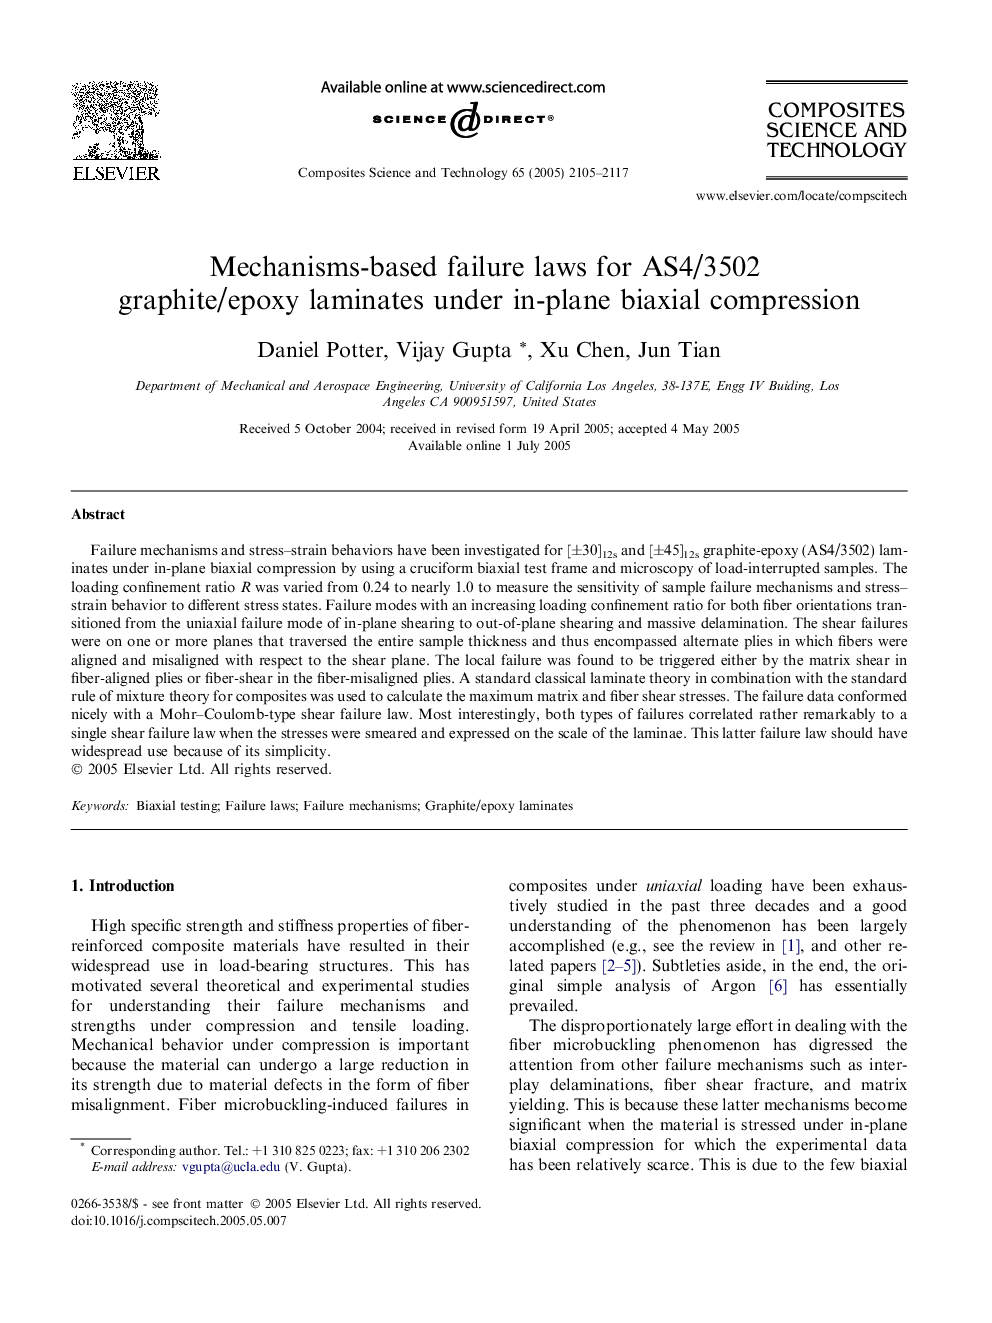 Mechanisms-based failure laws for AS4/3502 graphite/epoxy laminates under in-plane biaxial compression